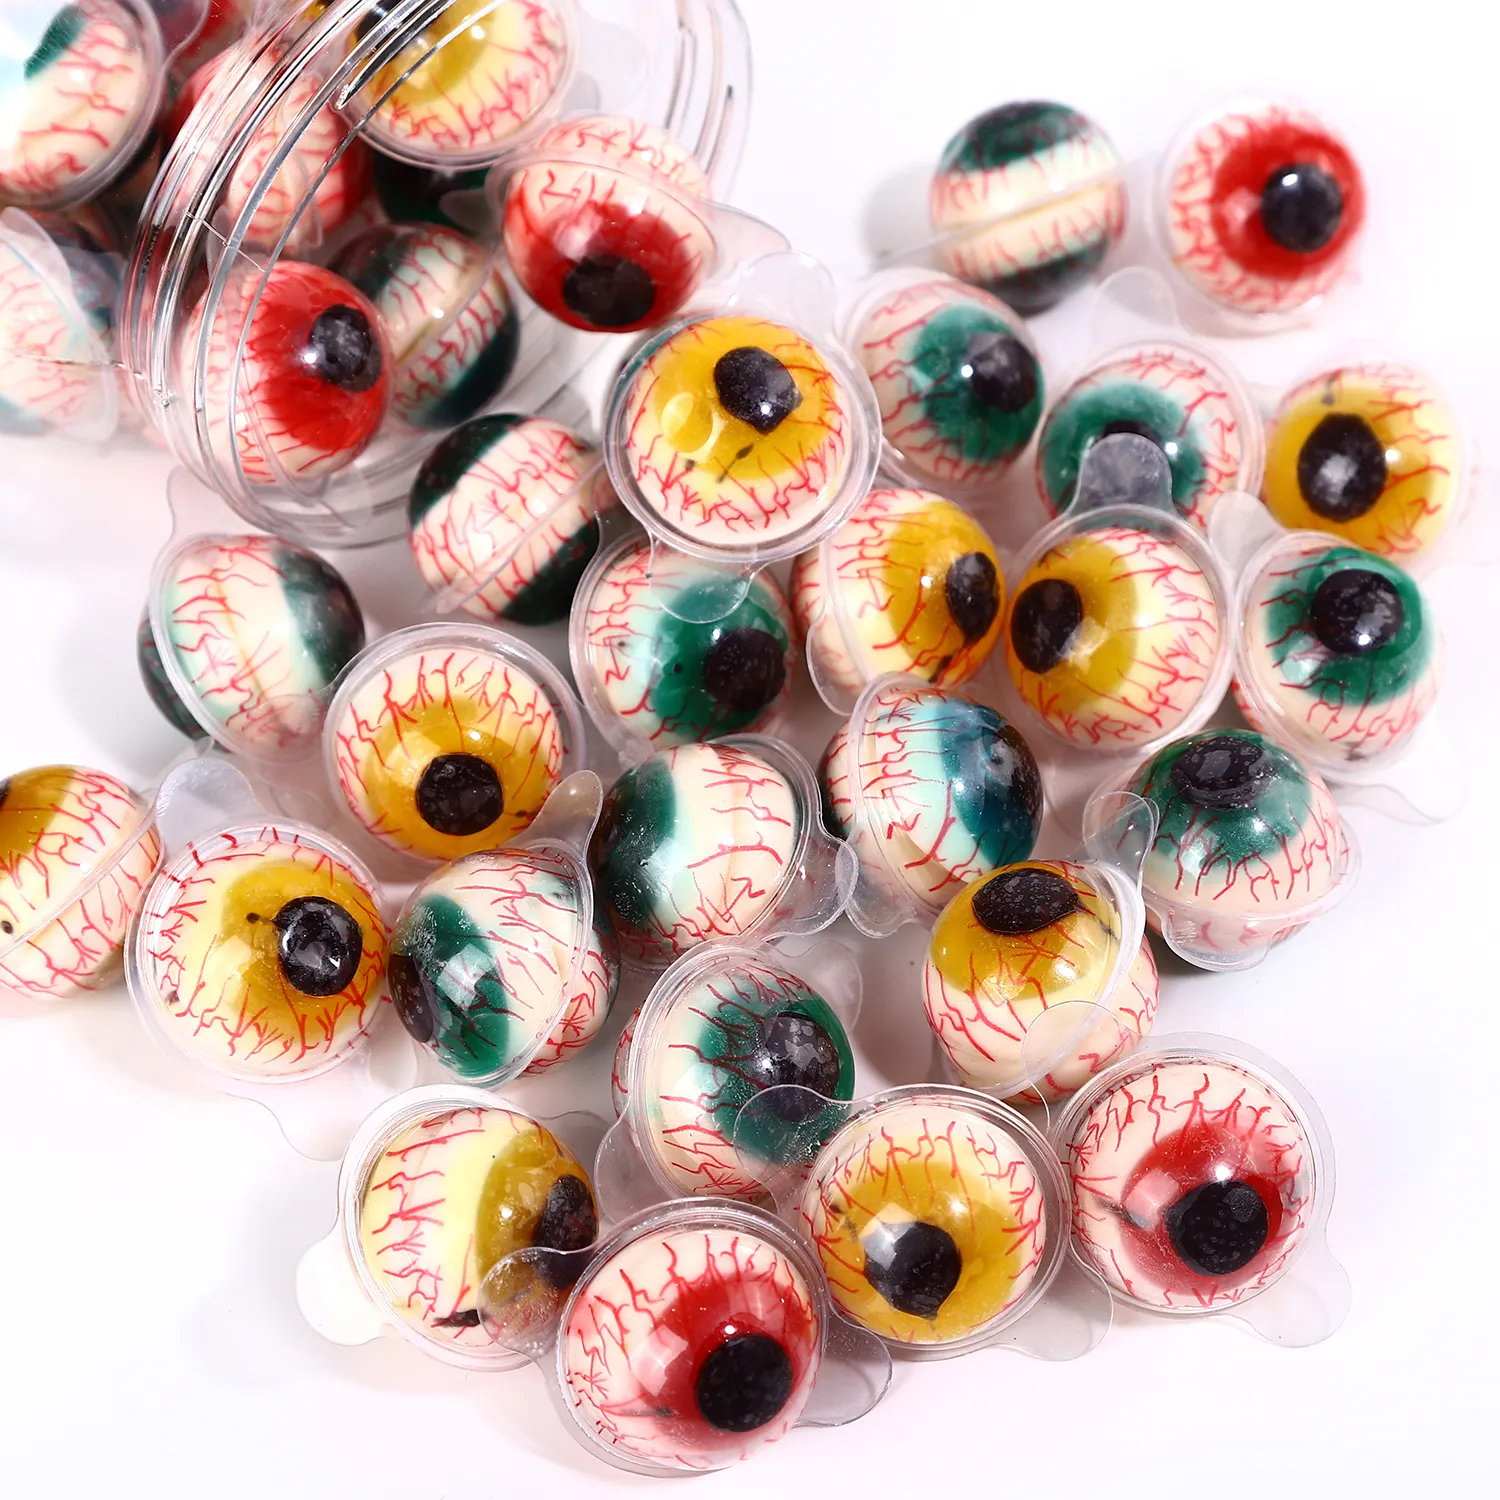 halal sweet imported eyeballs candy and sweets candies wholesale eyes gummy candy